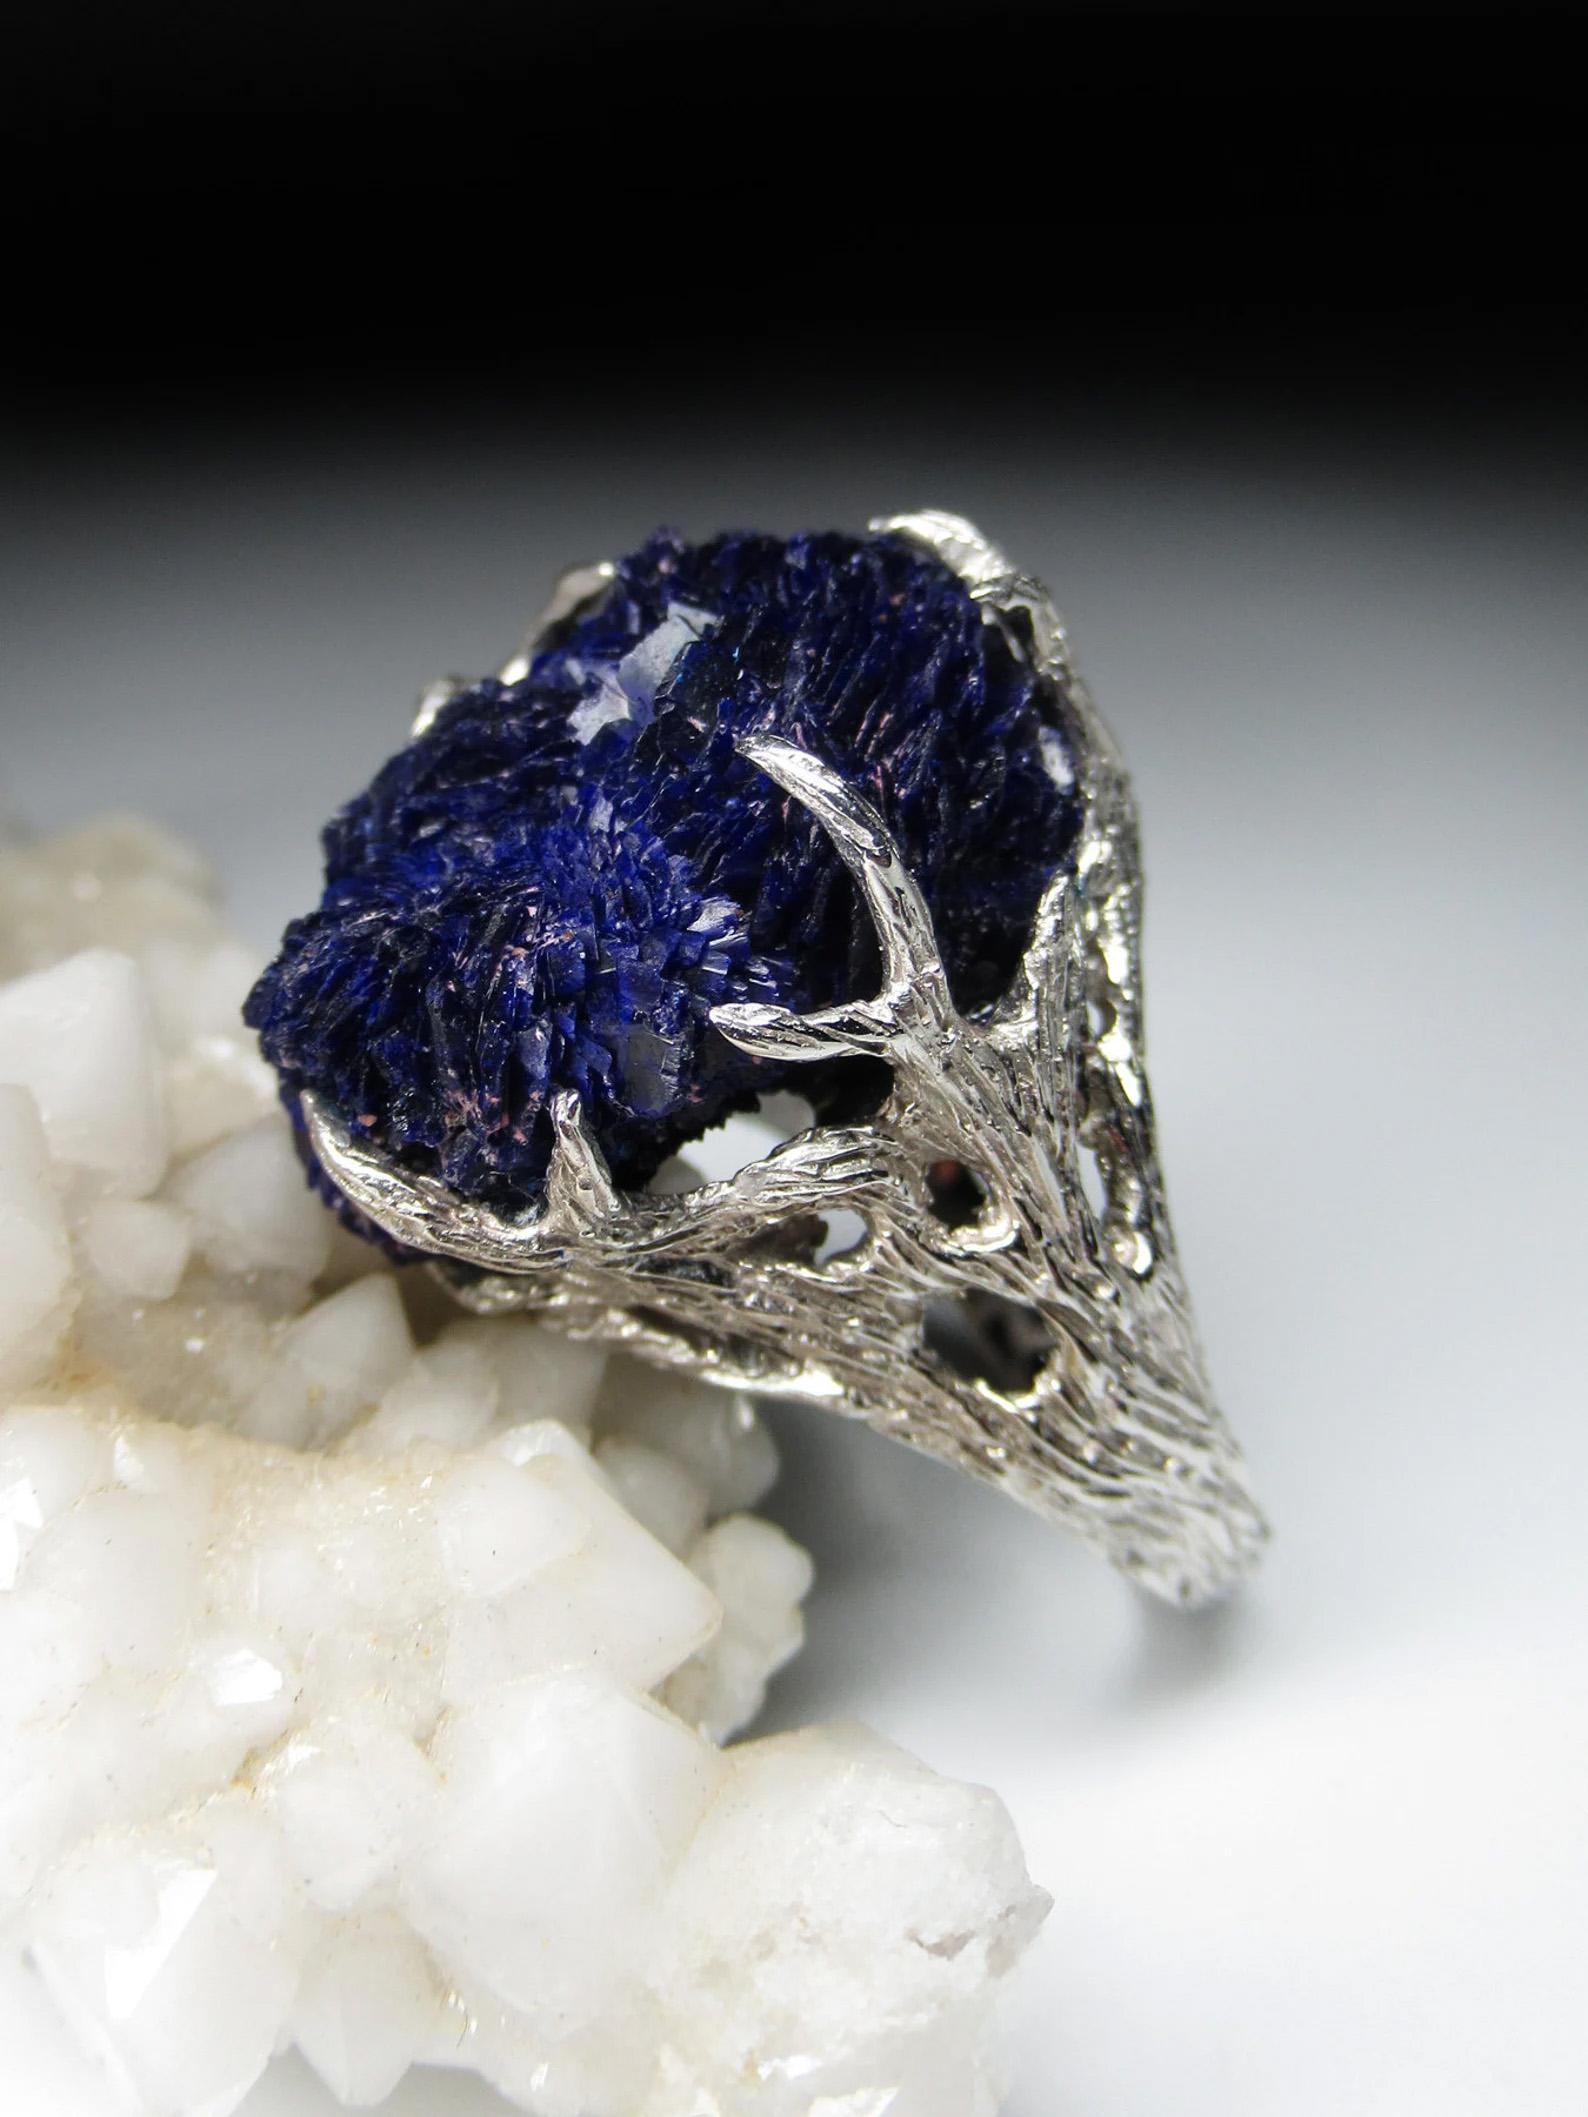 Silver ring with natural Azurite 
аzurite measurements - 0,59 x 0,71 x 0,98 in / 15 x 18 x 25 mm
аzurite weight - 51.45 carat
ring size - 8 US
ring weight - 16 grams